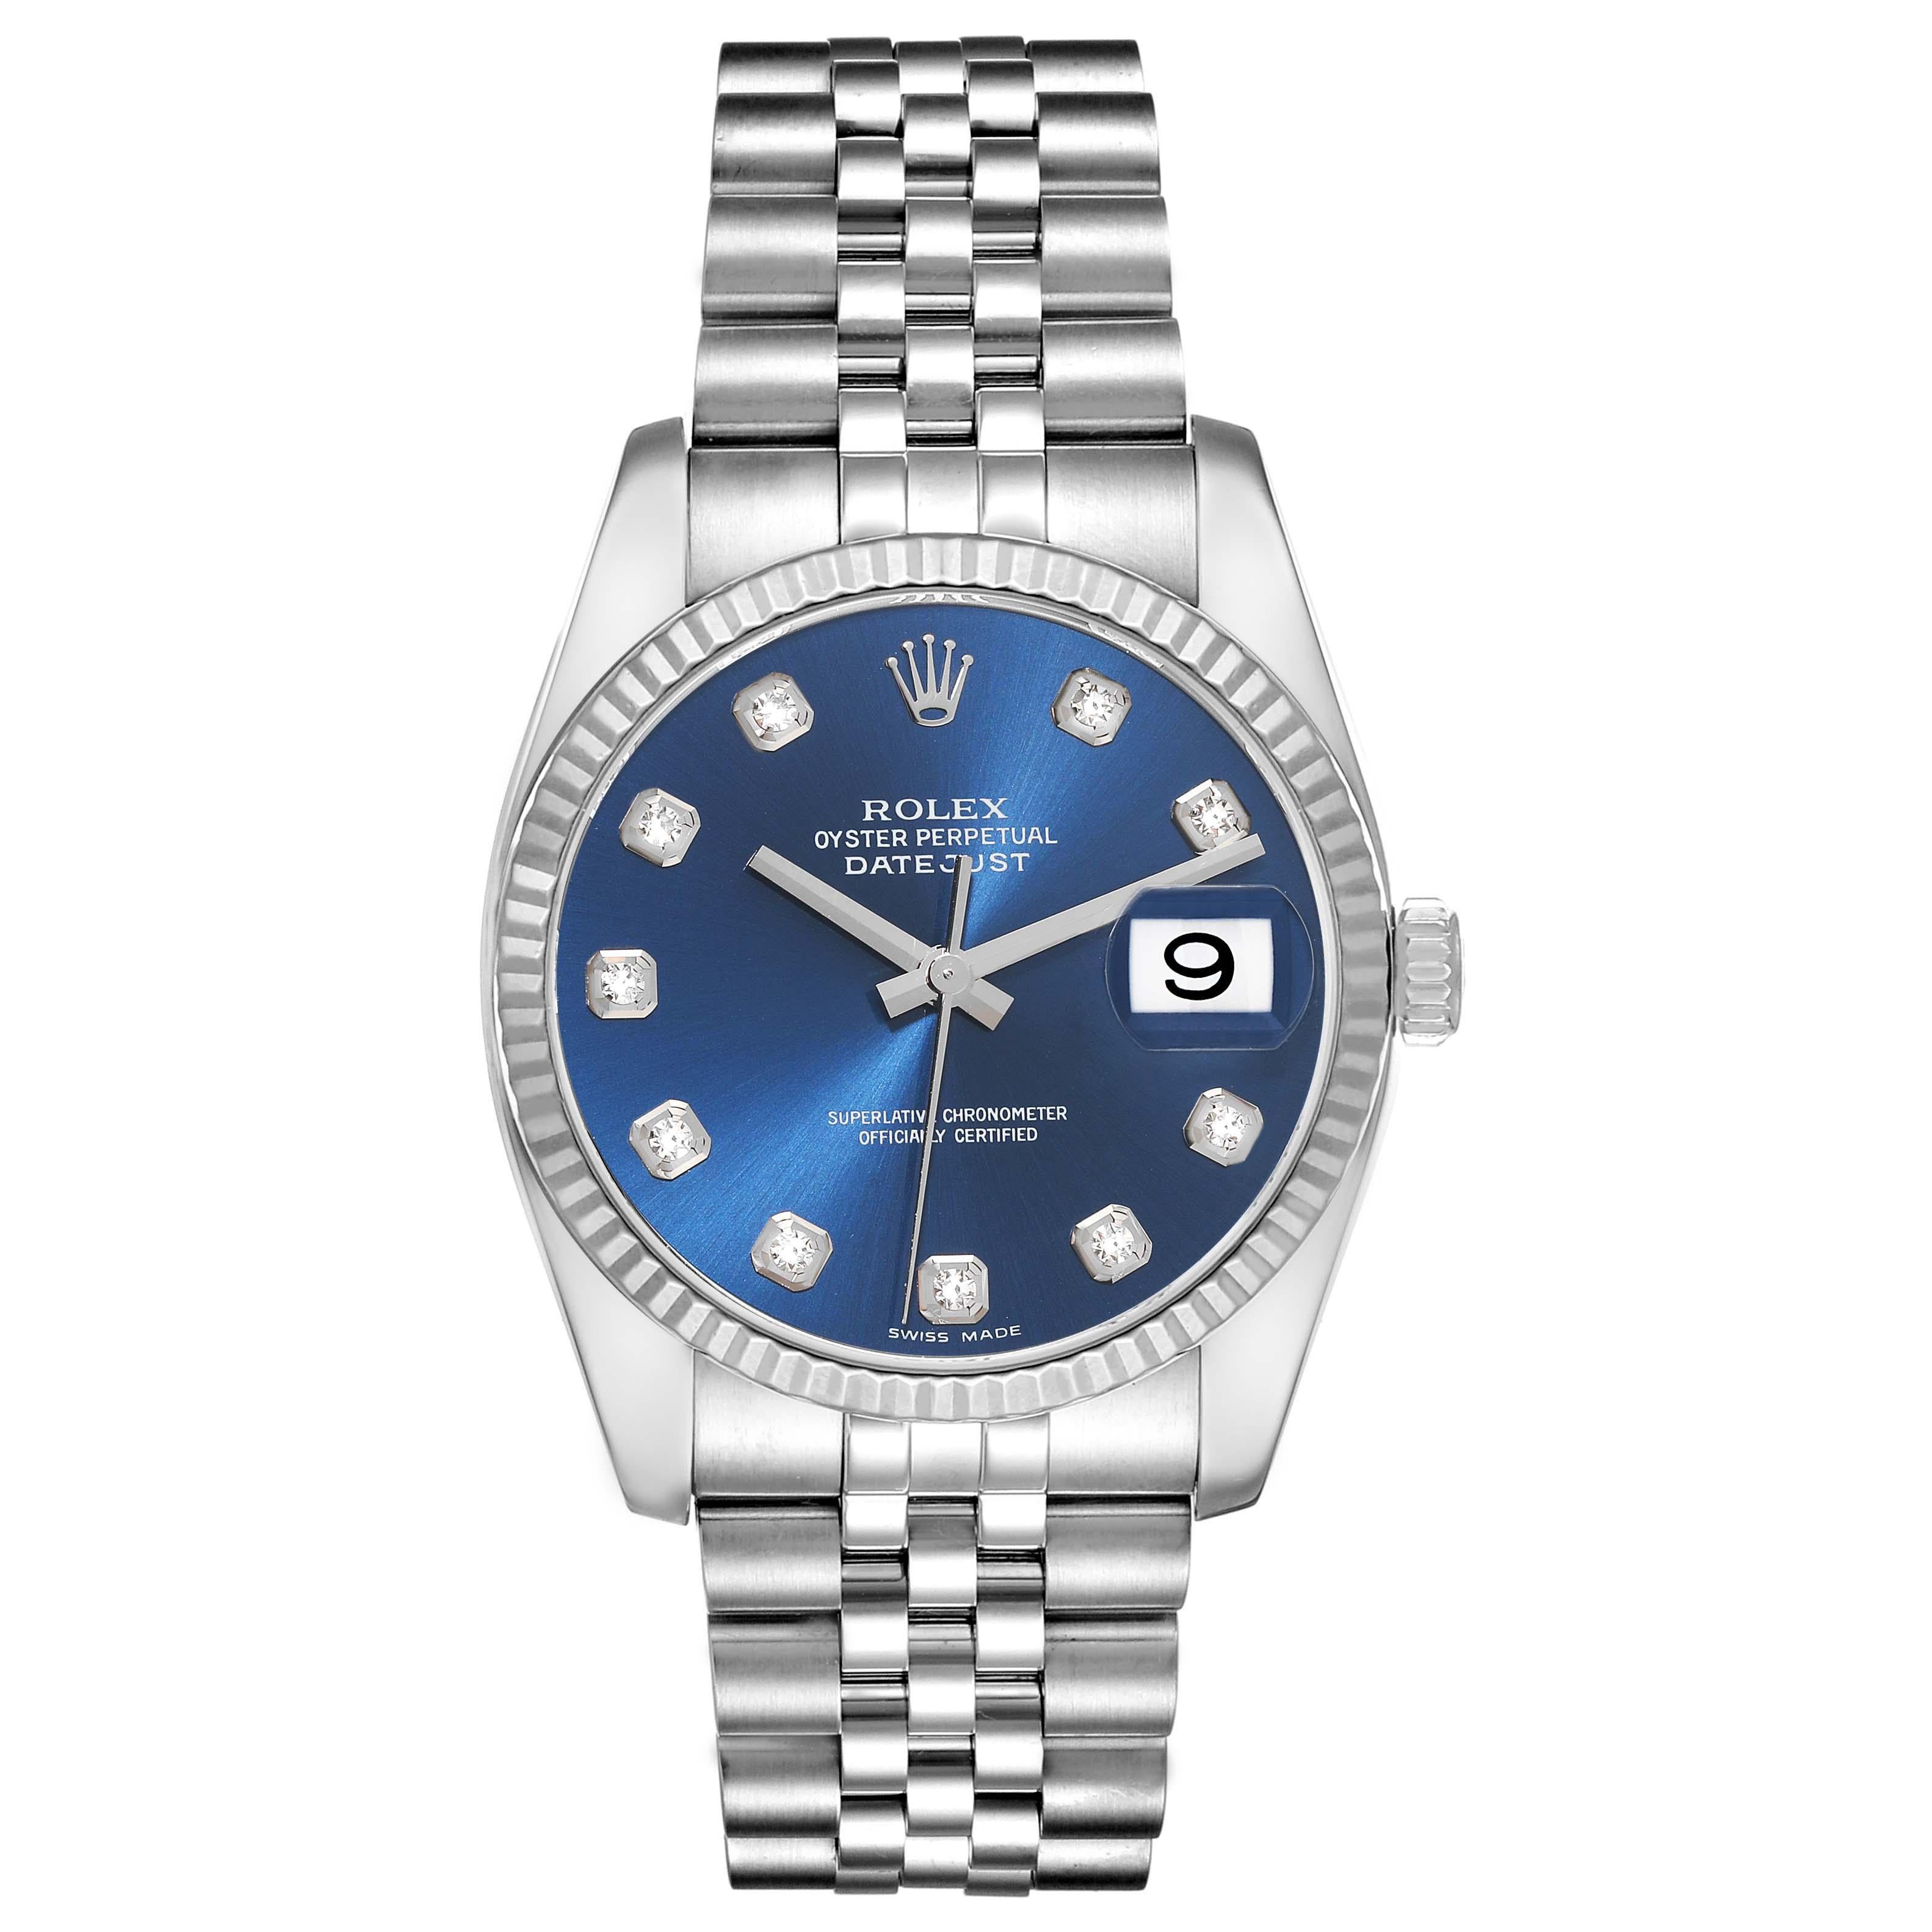 Rolex Datejust Steel White Gold Blue Diamond Dial Mens Watch 116234. Officially certified chronometer automatic self-winding movement. Stainless steel case 36.0 mm in diameter. Rolex logo on the crown. 18k white gold fluted bezel. Scratch resistant